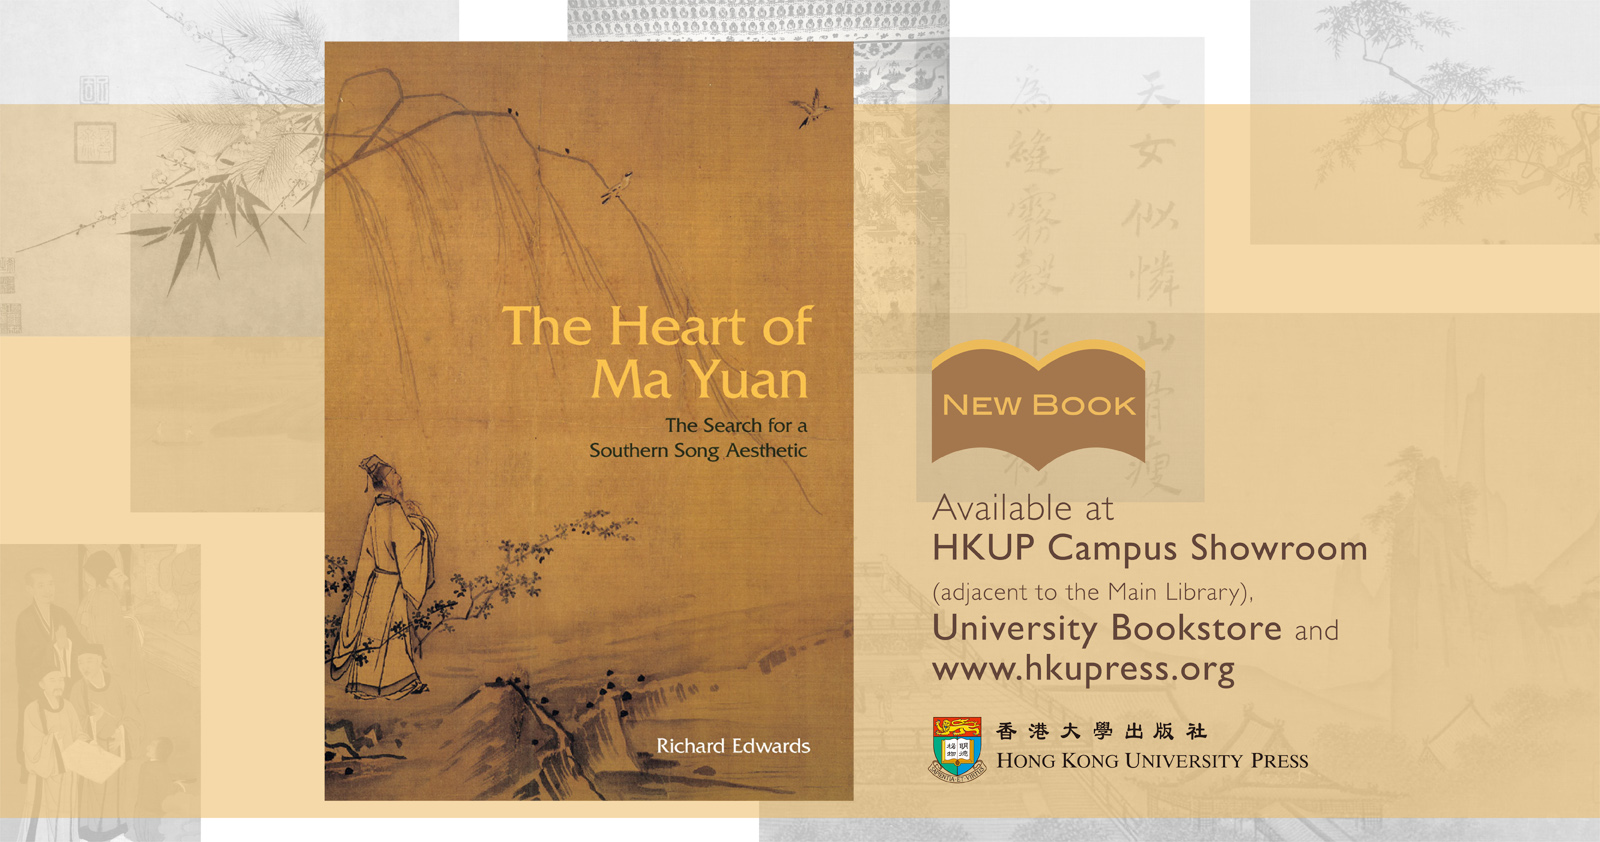 New Book from HKUP - The Heart of Ma Yuan